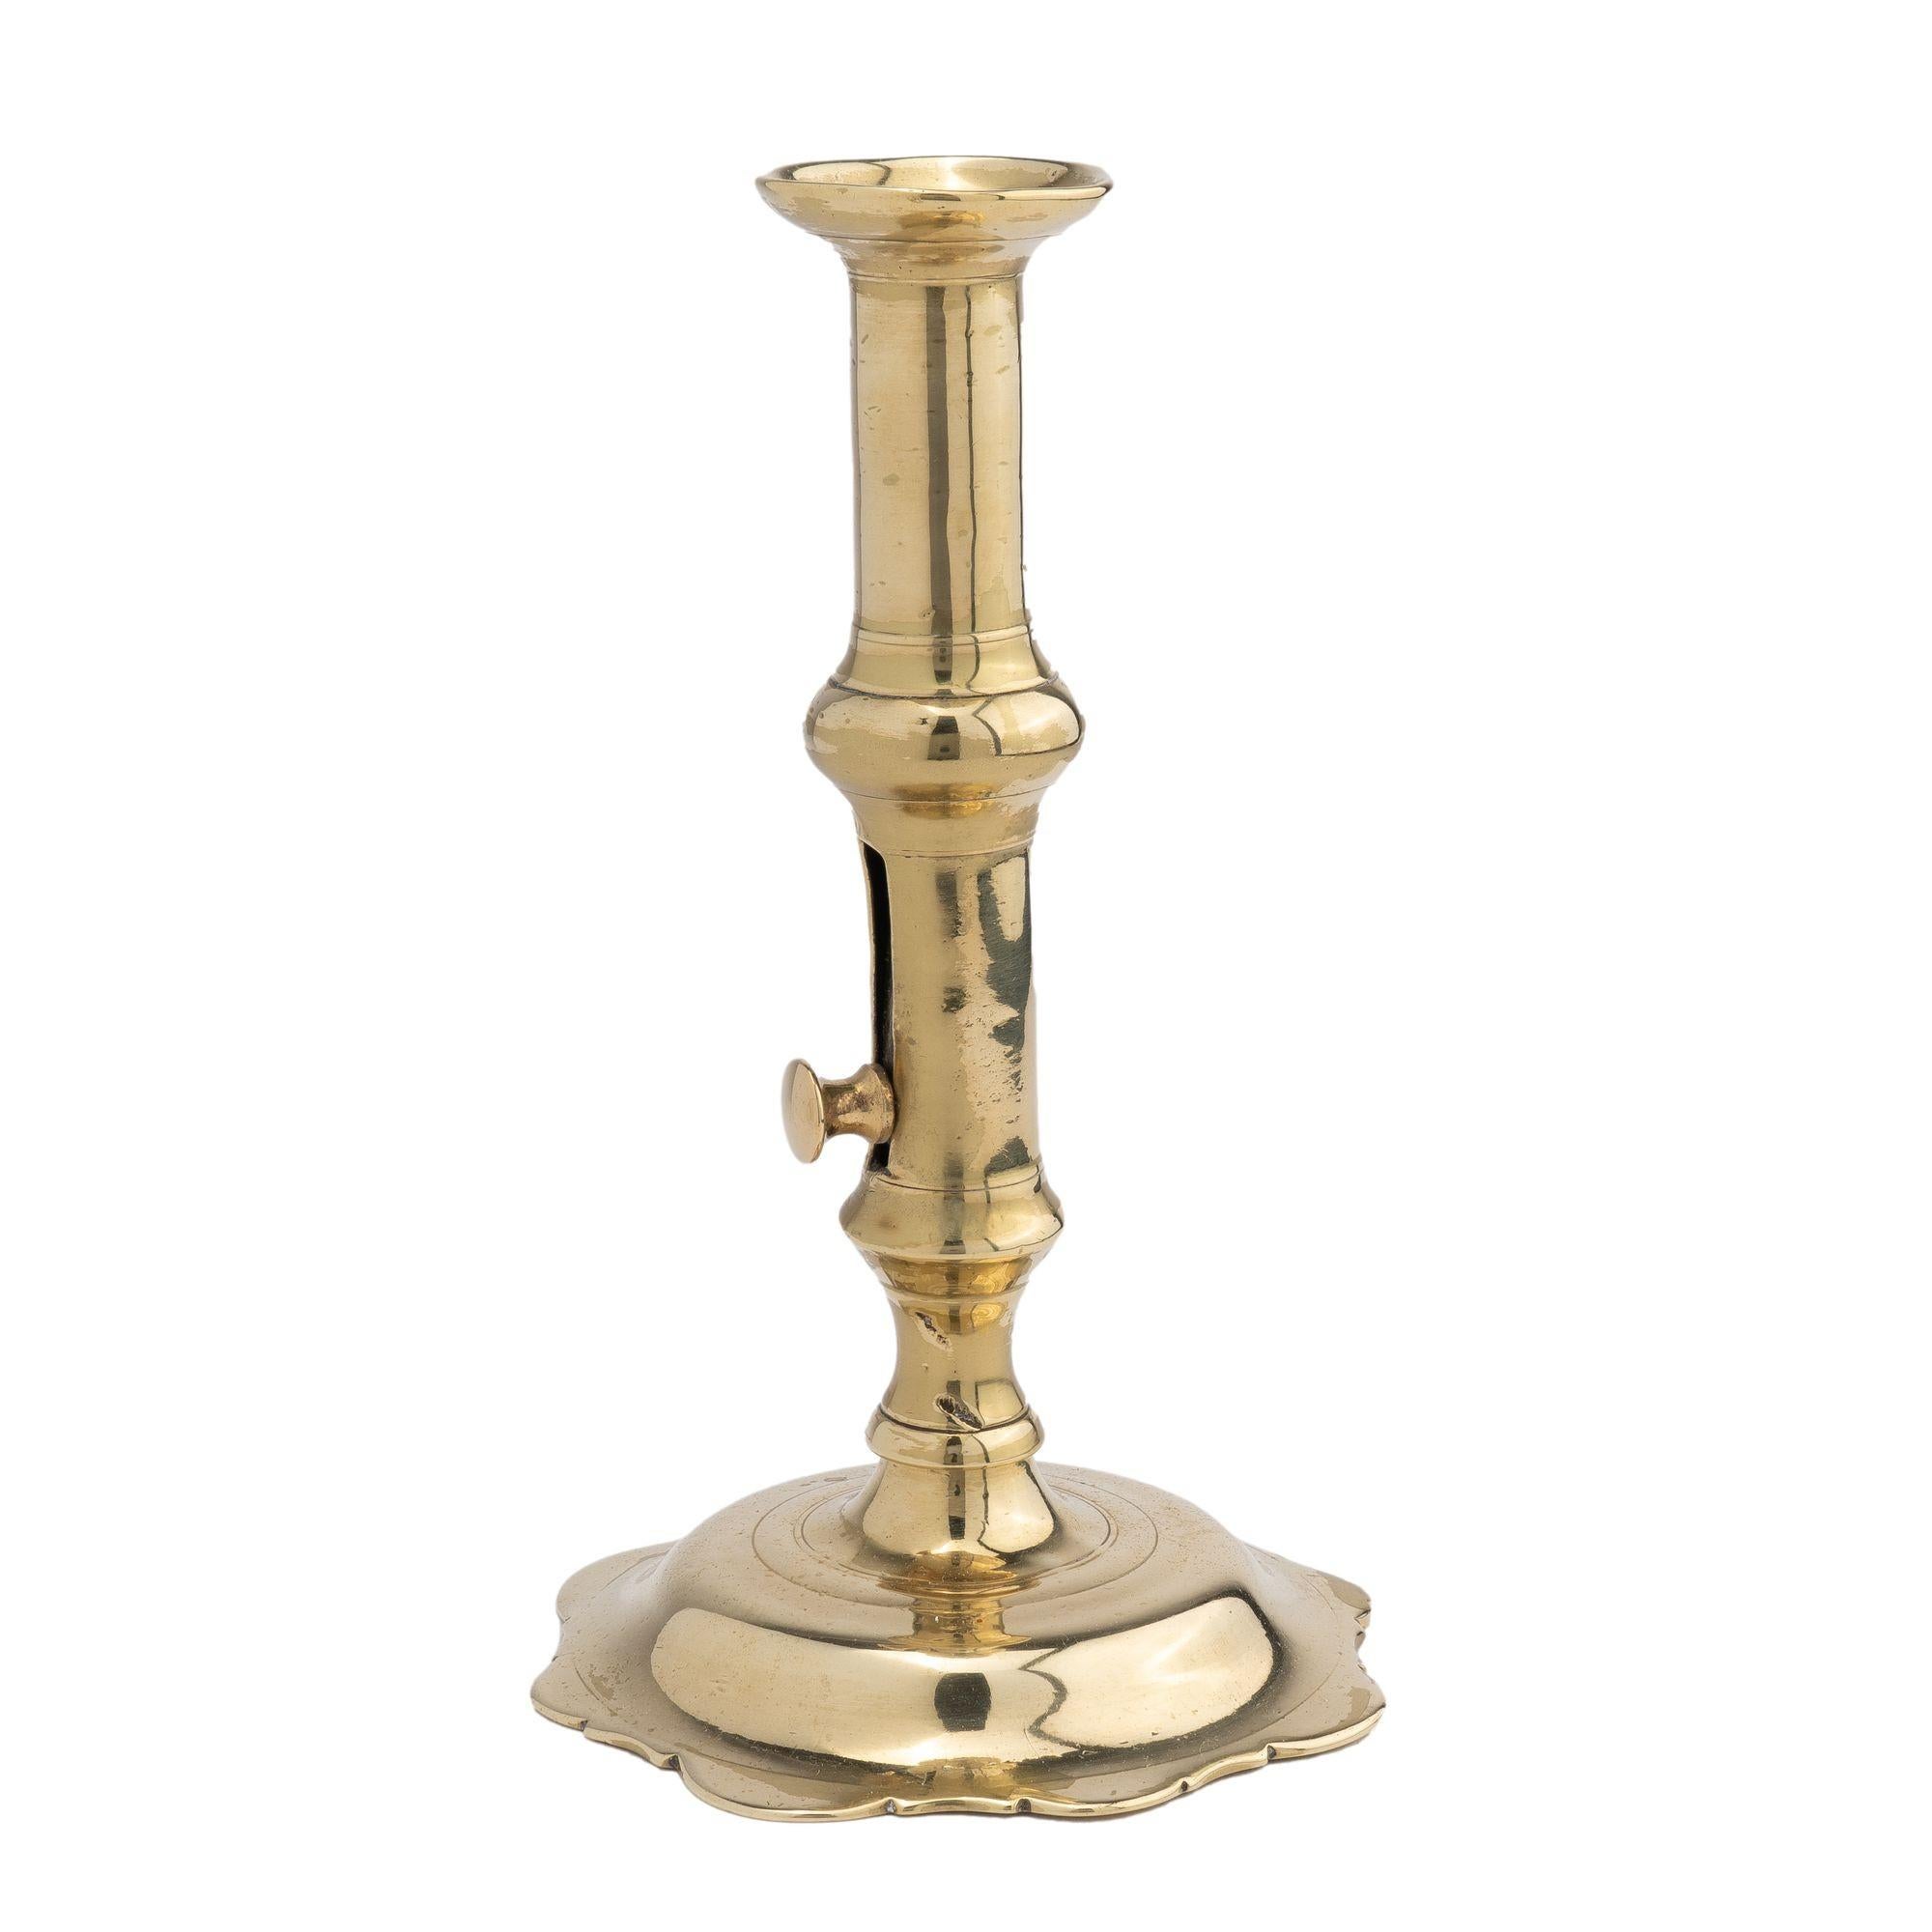 English Georgian hollow core cast brass Queen Anne canon barrel form candlestick. The design features a cupped bobeshe, scolloped base, and side mounted knob candle ejector.

Birmingham, England, circa 1760.